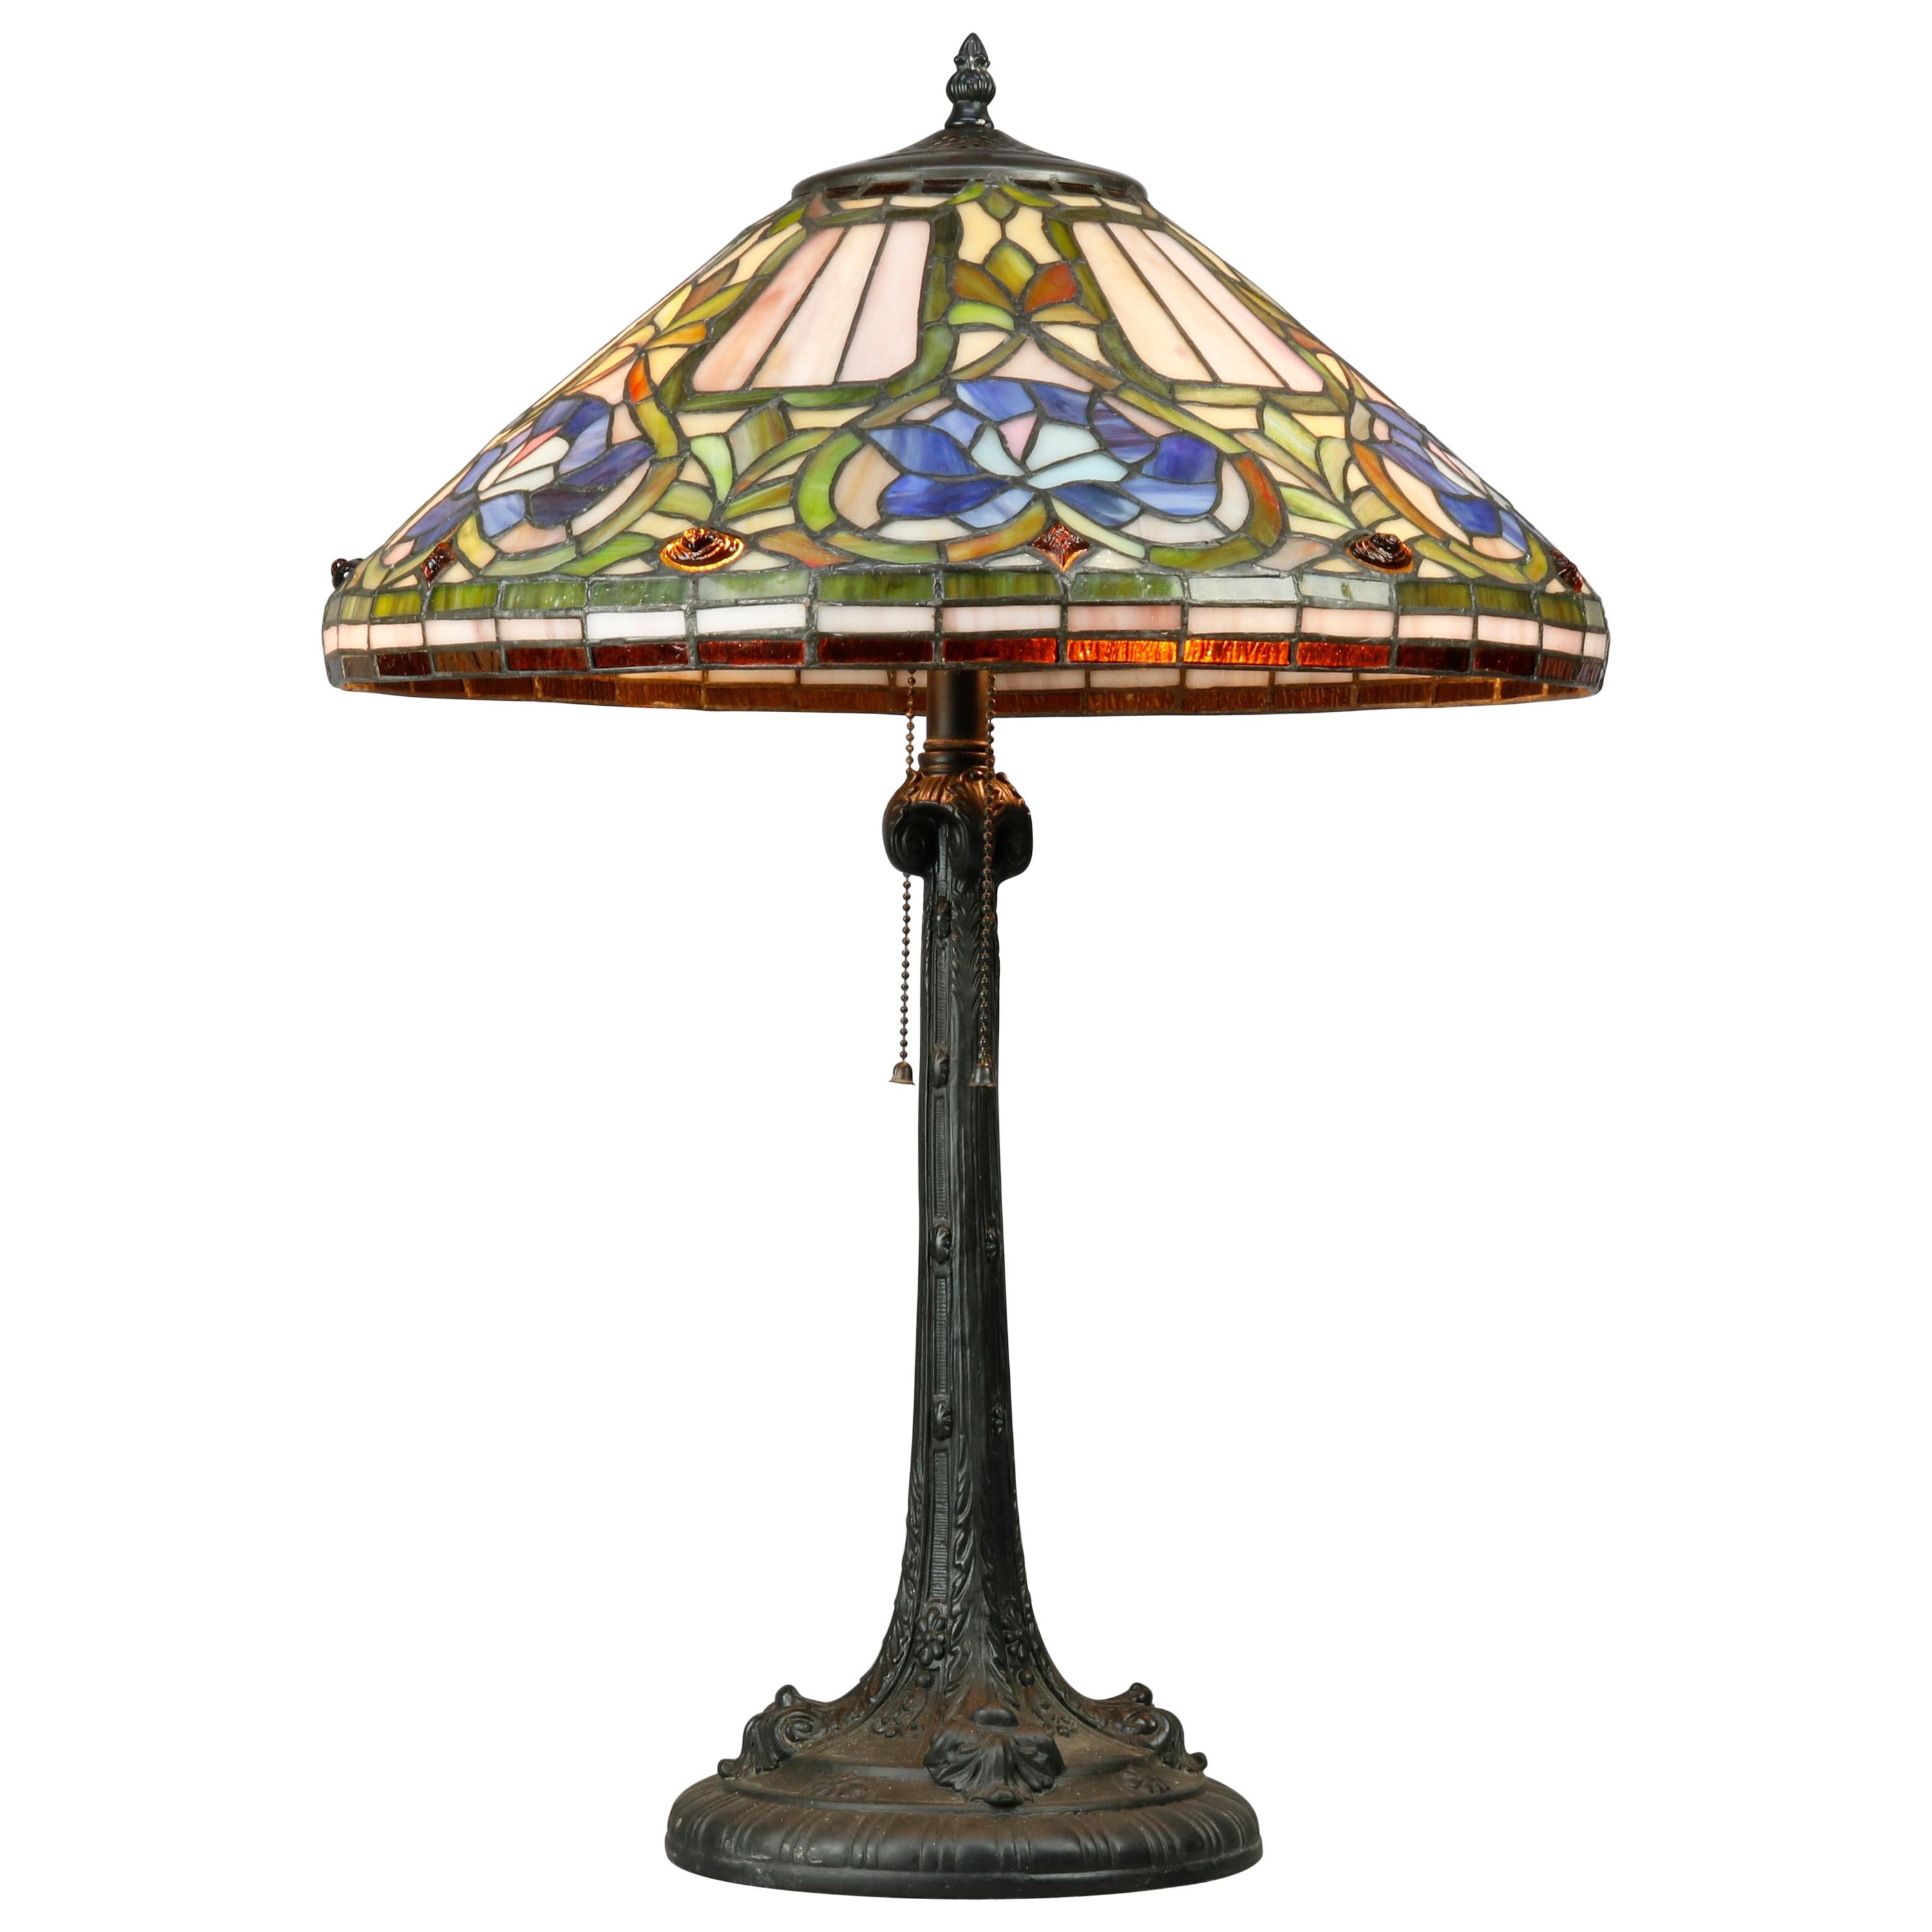 Antique Arts & Crafts Stylized Floral Slag, Stained and Jewel Glass Lamp